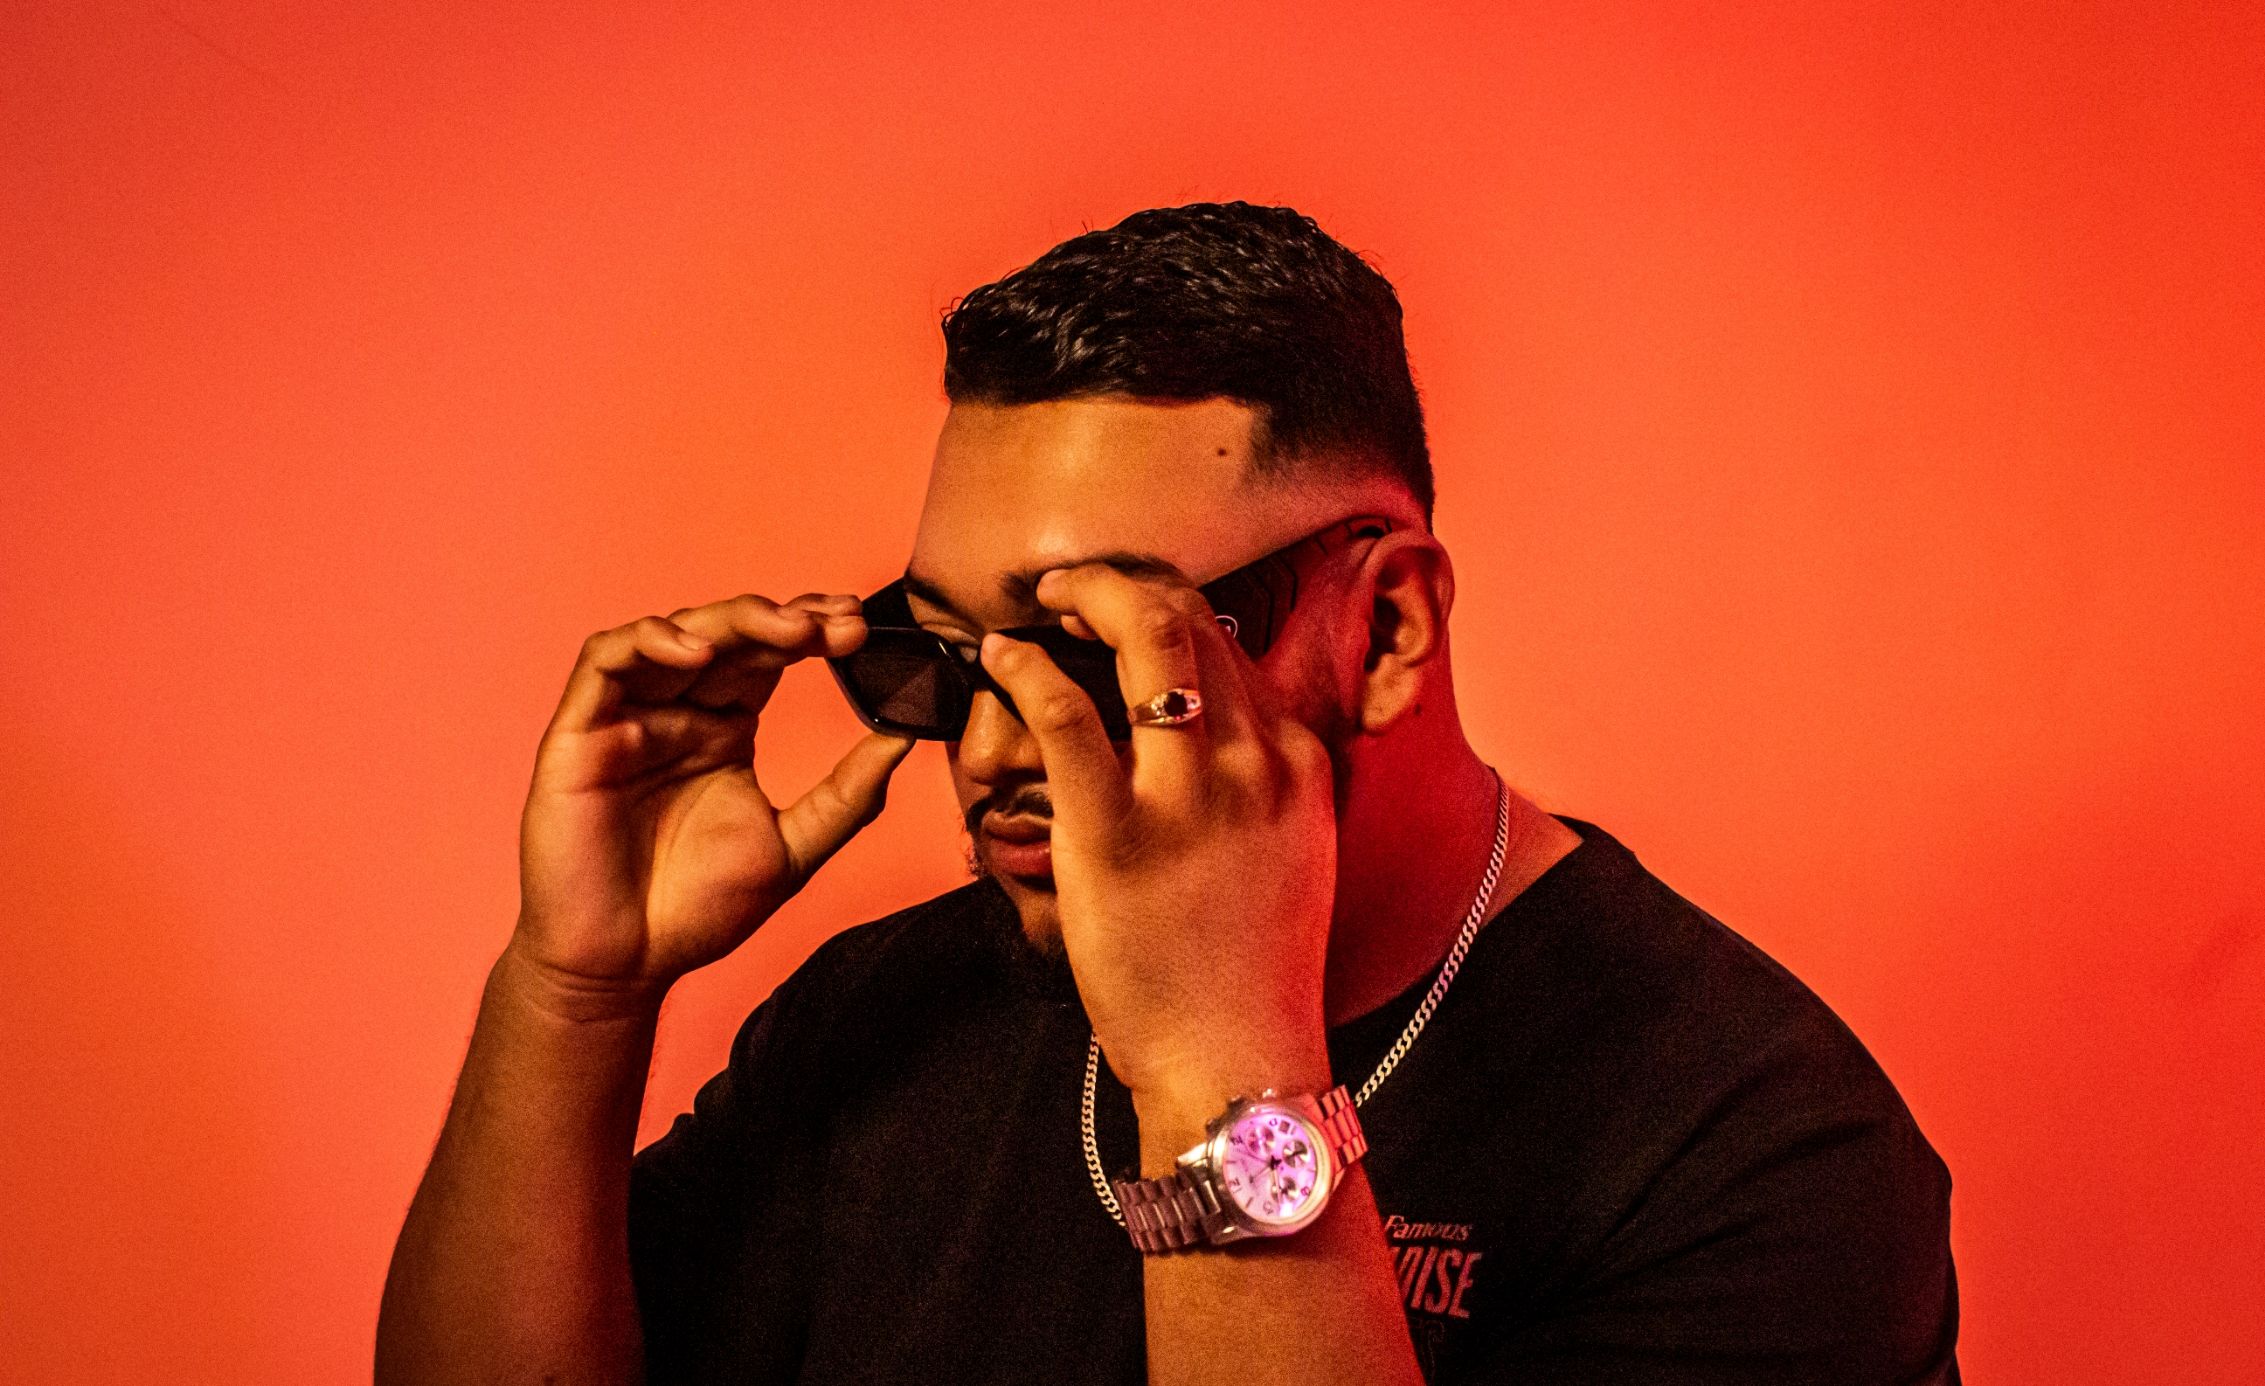 A man adjusting his sunglasses against a vibrant red background. He wears a watch and a chain, and has a neatly styled haircut.